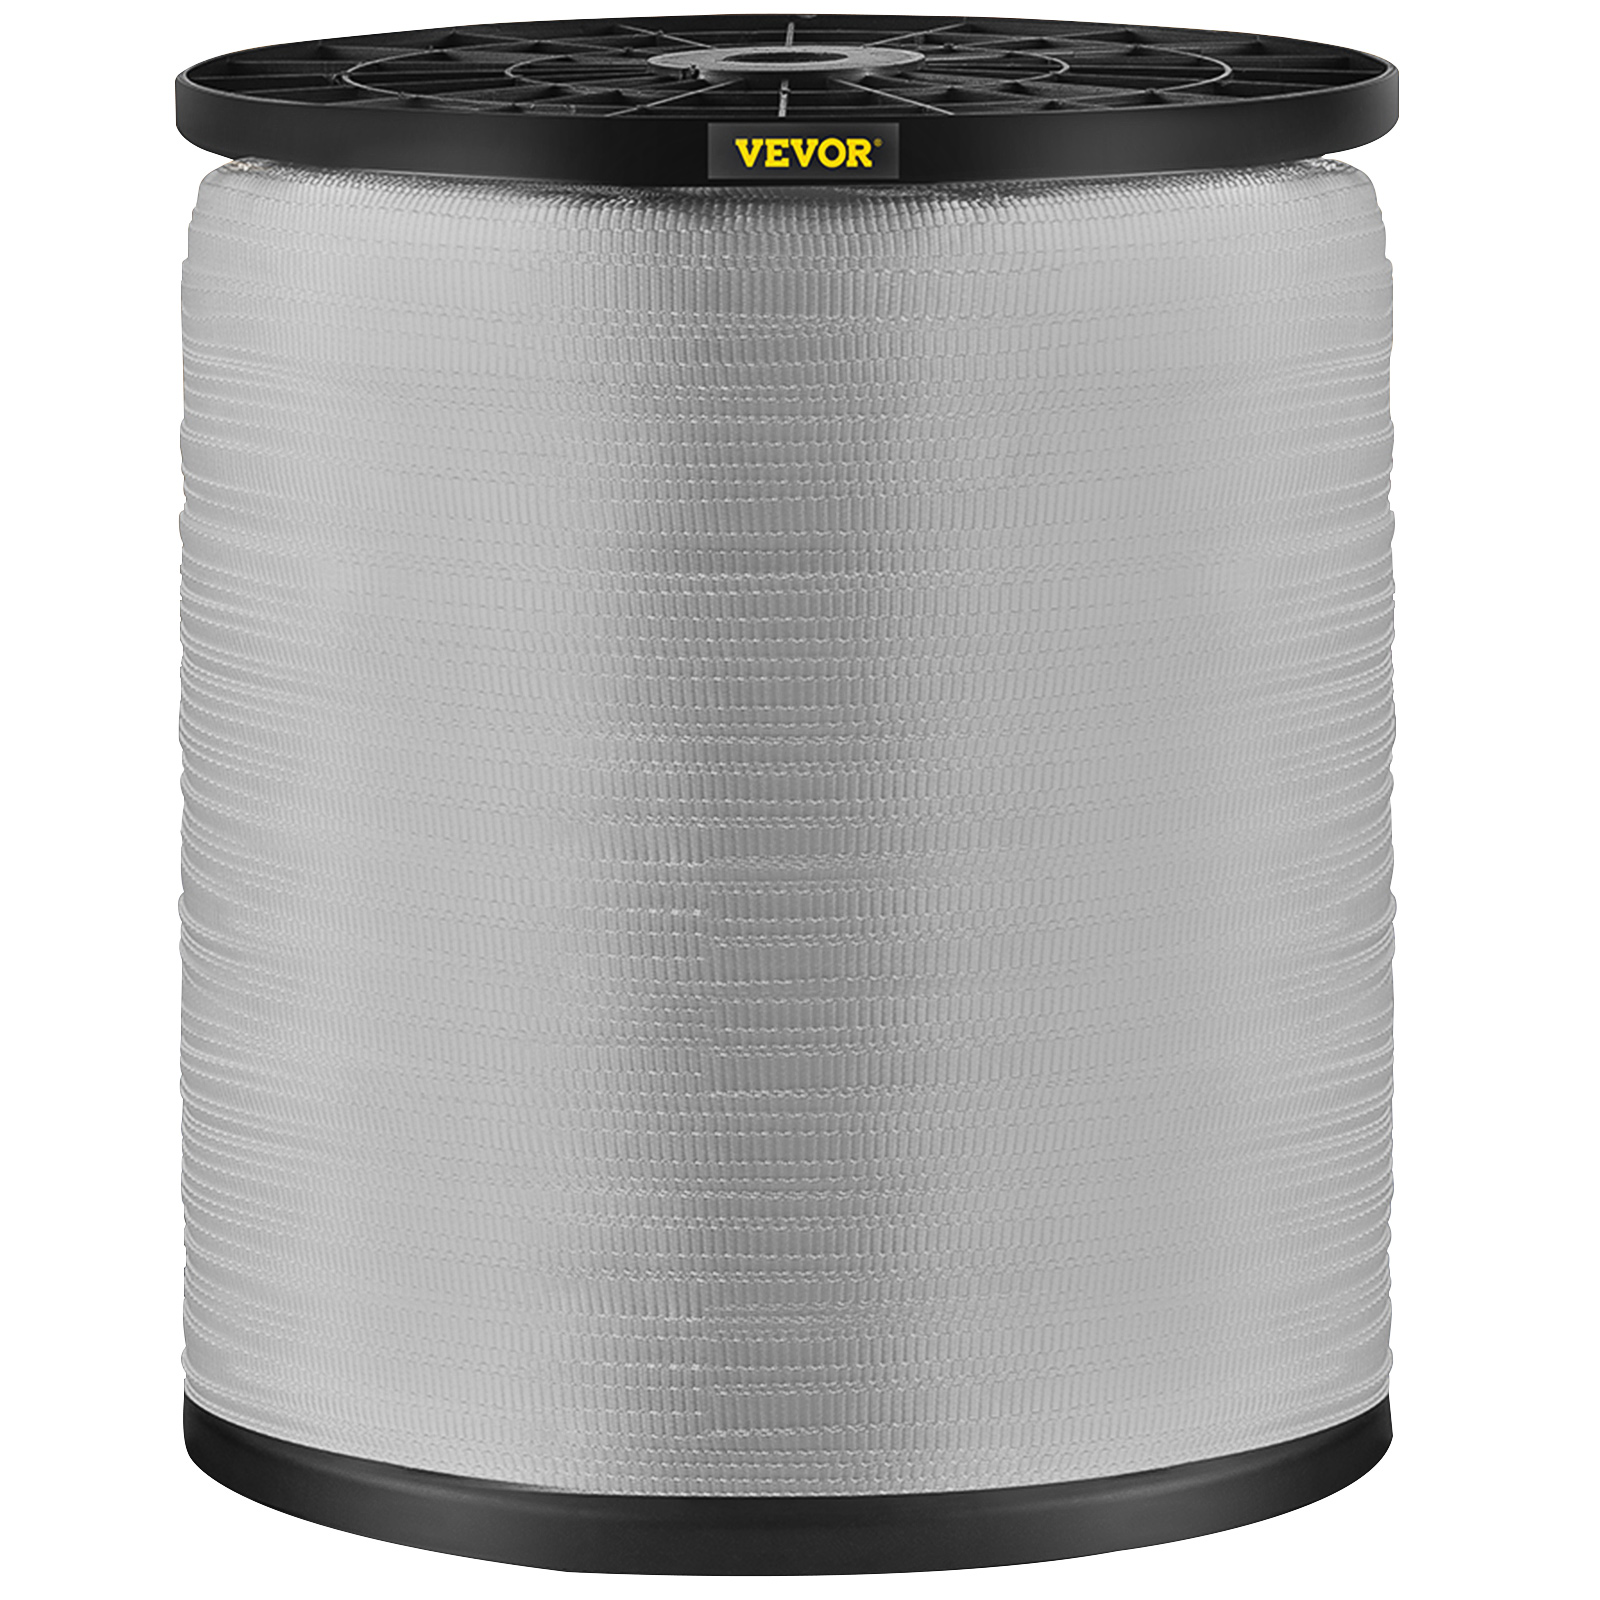 Vevor 5/8" X 108' Polyester Pull Tape Flat Rope 1800 Lbs Tensile Capacity от Vevor Many GEOs